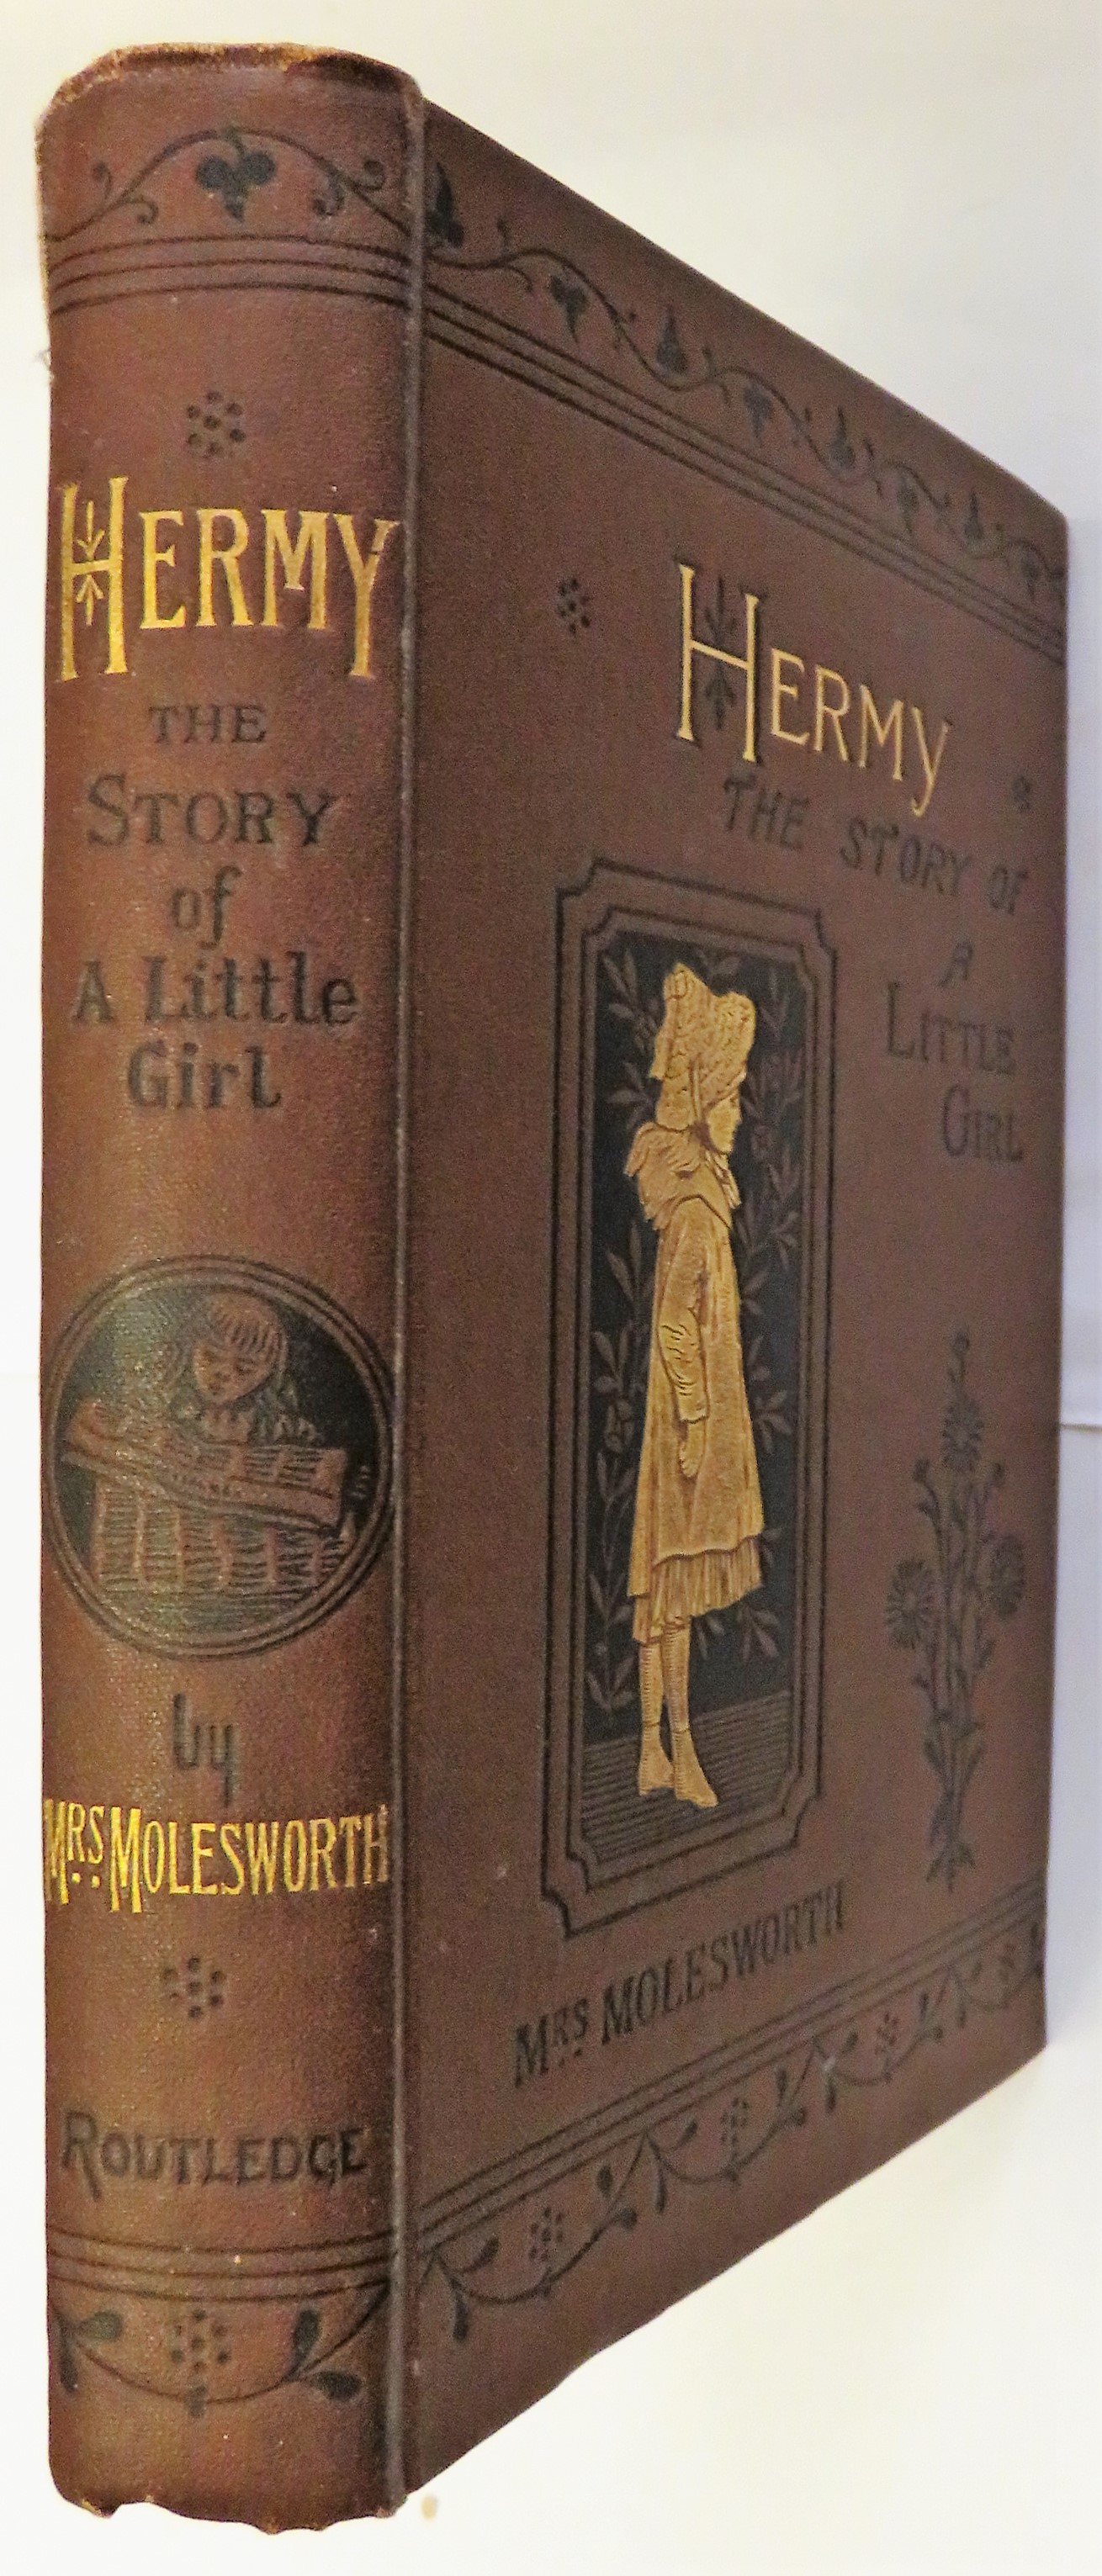 Hermy The Story of a Little Girl